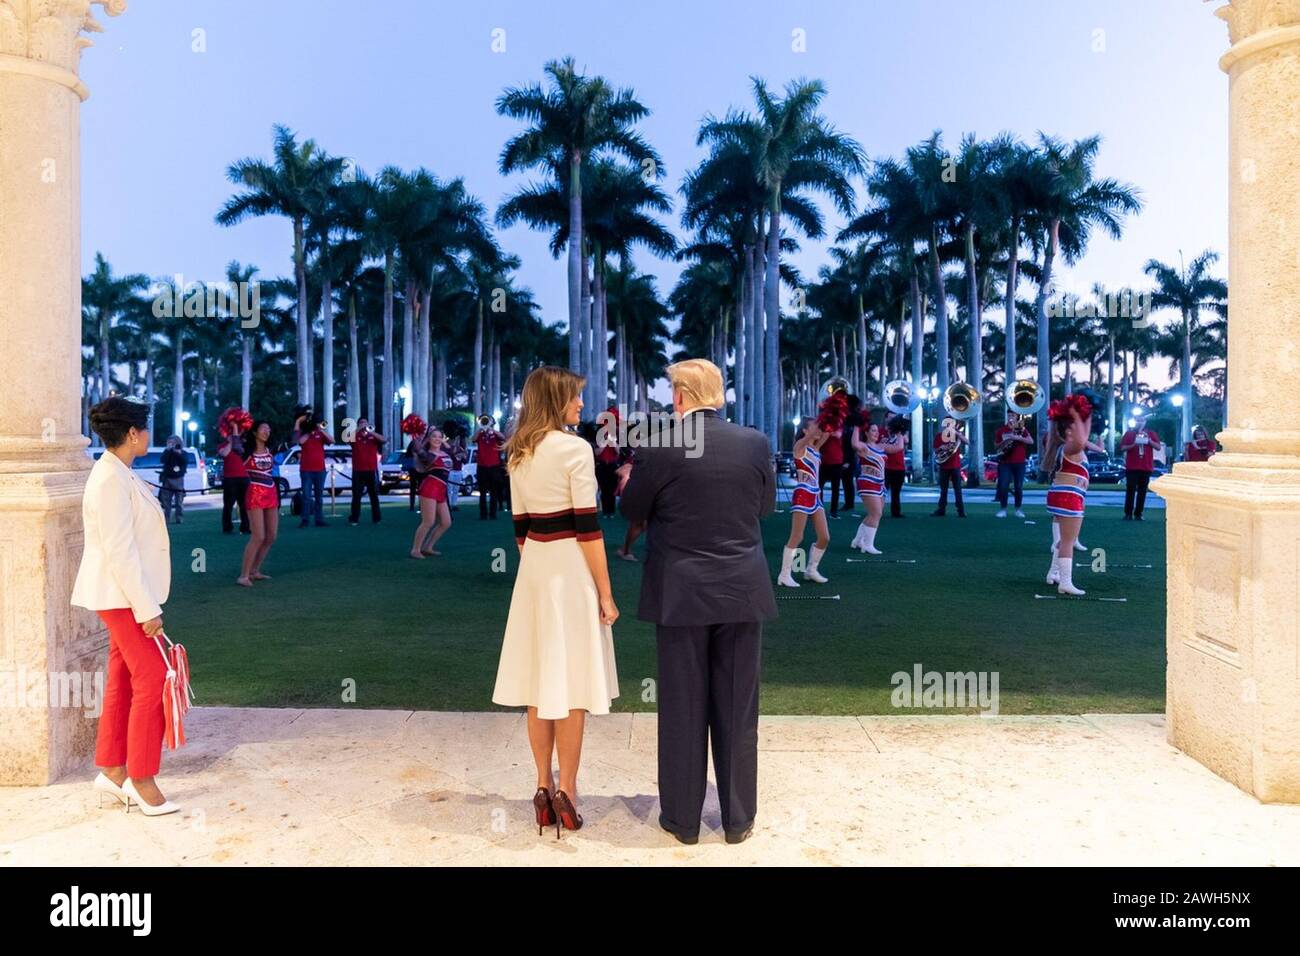 President Donald J. Trump and First Lady Melania Trump are entertained by members of the Florida Atlantic University marching band Sunday, Feb. 2, 2020, outside the Trump International Golf Club in West Palm Beach, Fla., prior to attending a Super Bowl party. People: President Donald J. Trump and First Lady Melania Trump Credit: Storms Media Group/Alamy Live News Stock Photo